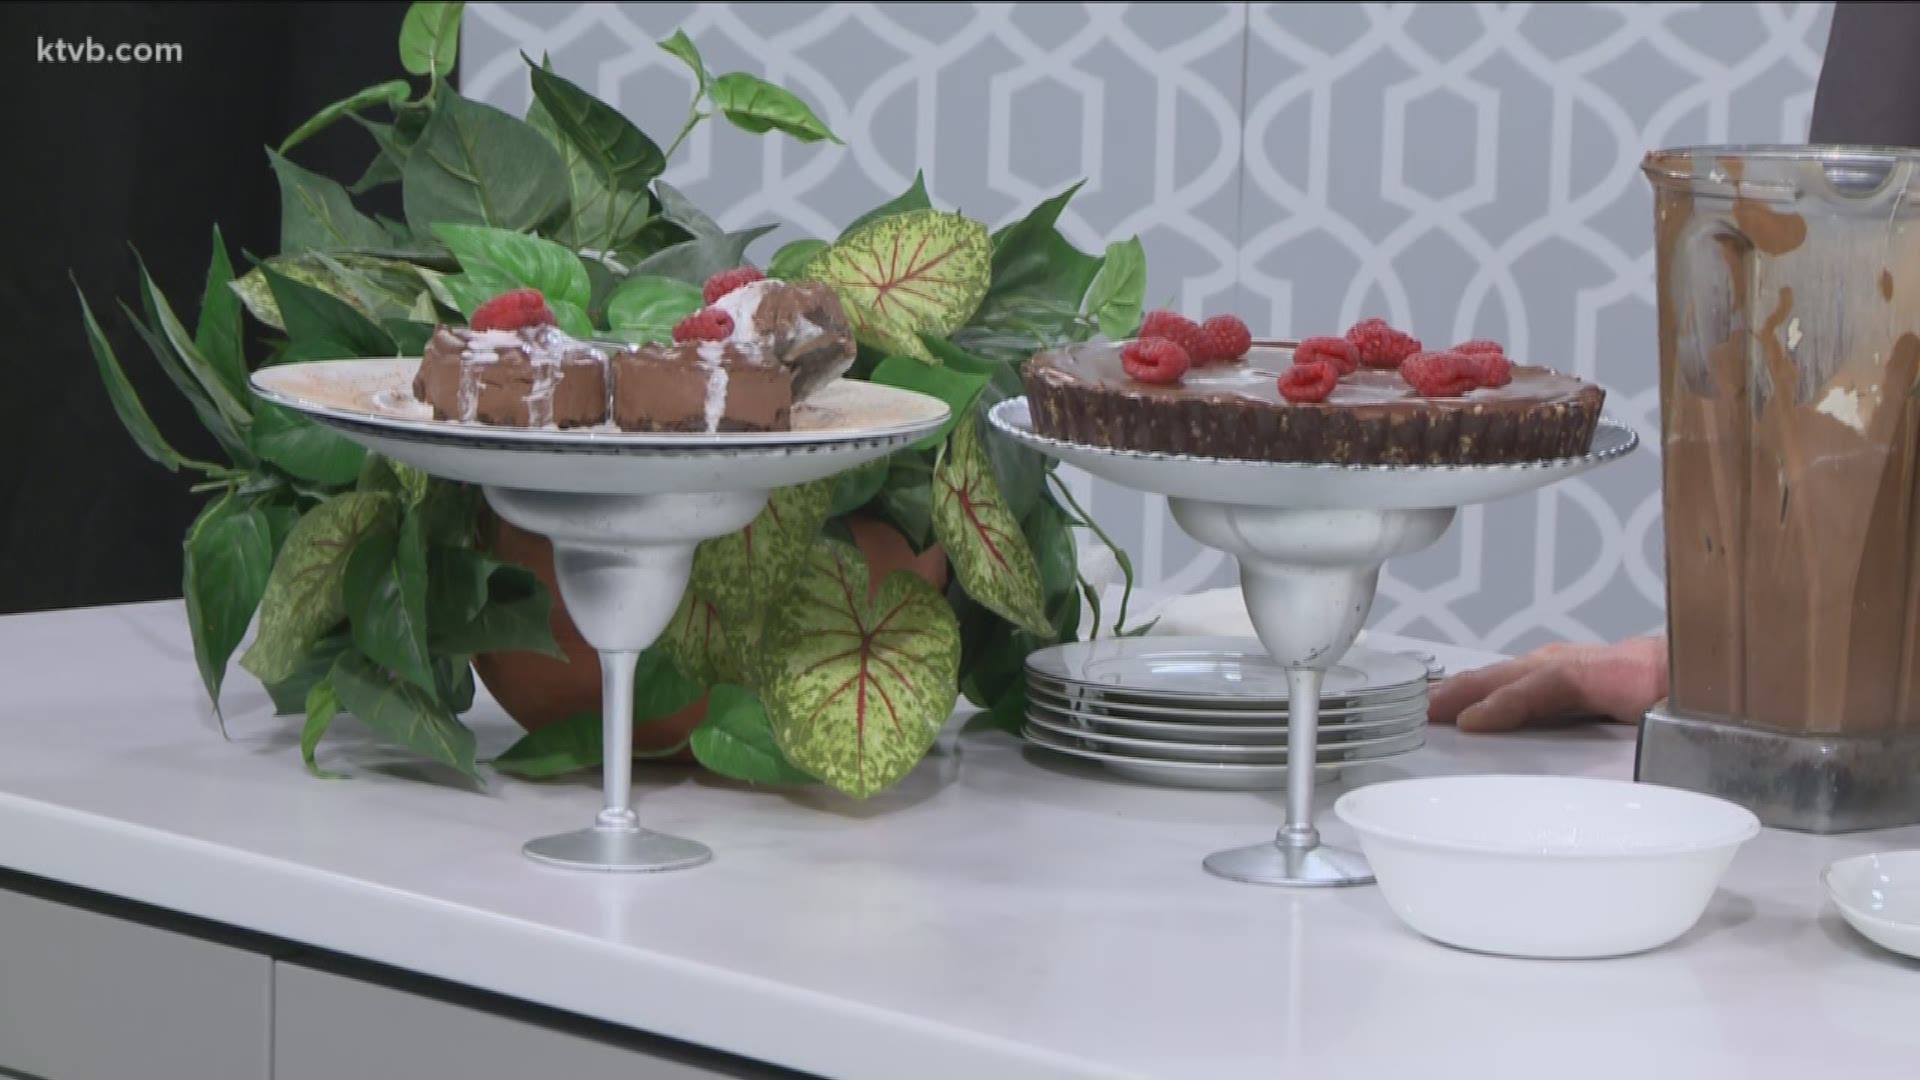 Chefs Lou Aaron and Shel Leigh stop by the KTVB Kitchen to show us how to make this delicious vegan treat.